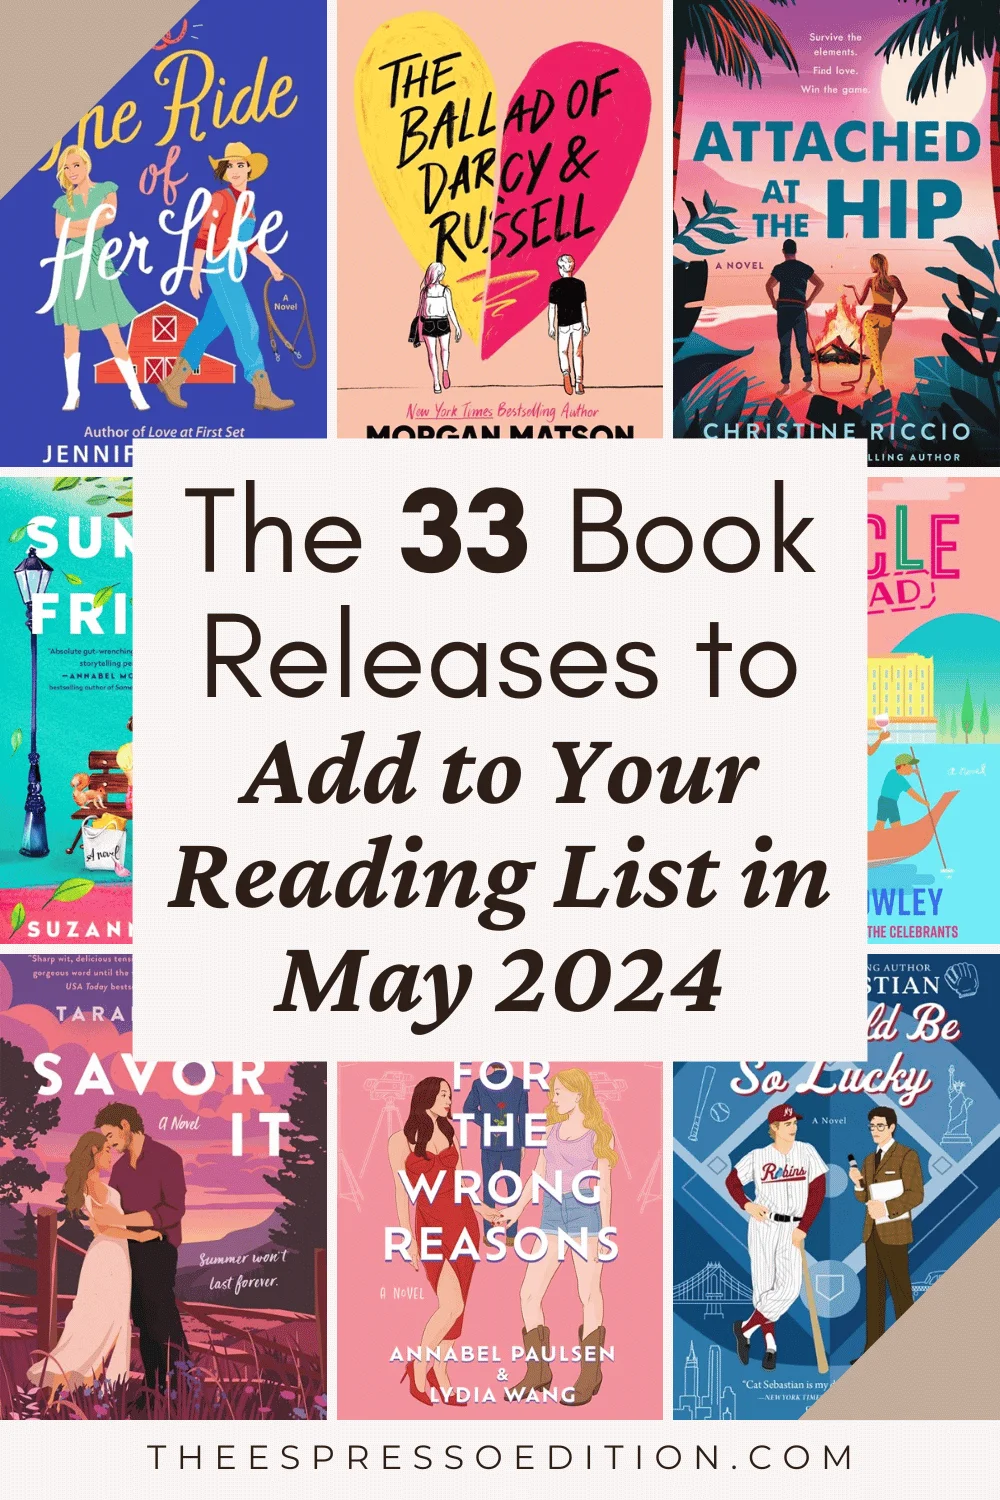 The 33 Book Releases to Add to Your Reading List in May 2024 by The Espresso Edition cozy bookish blog